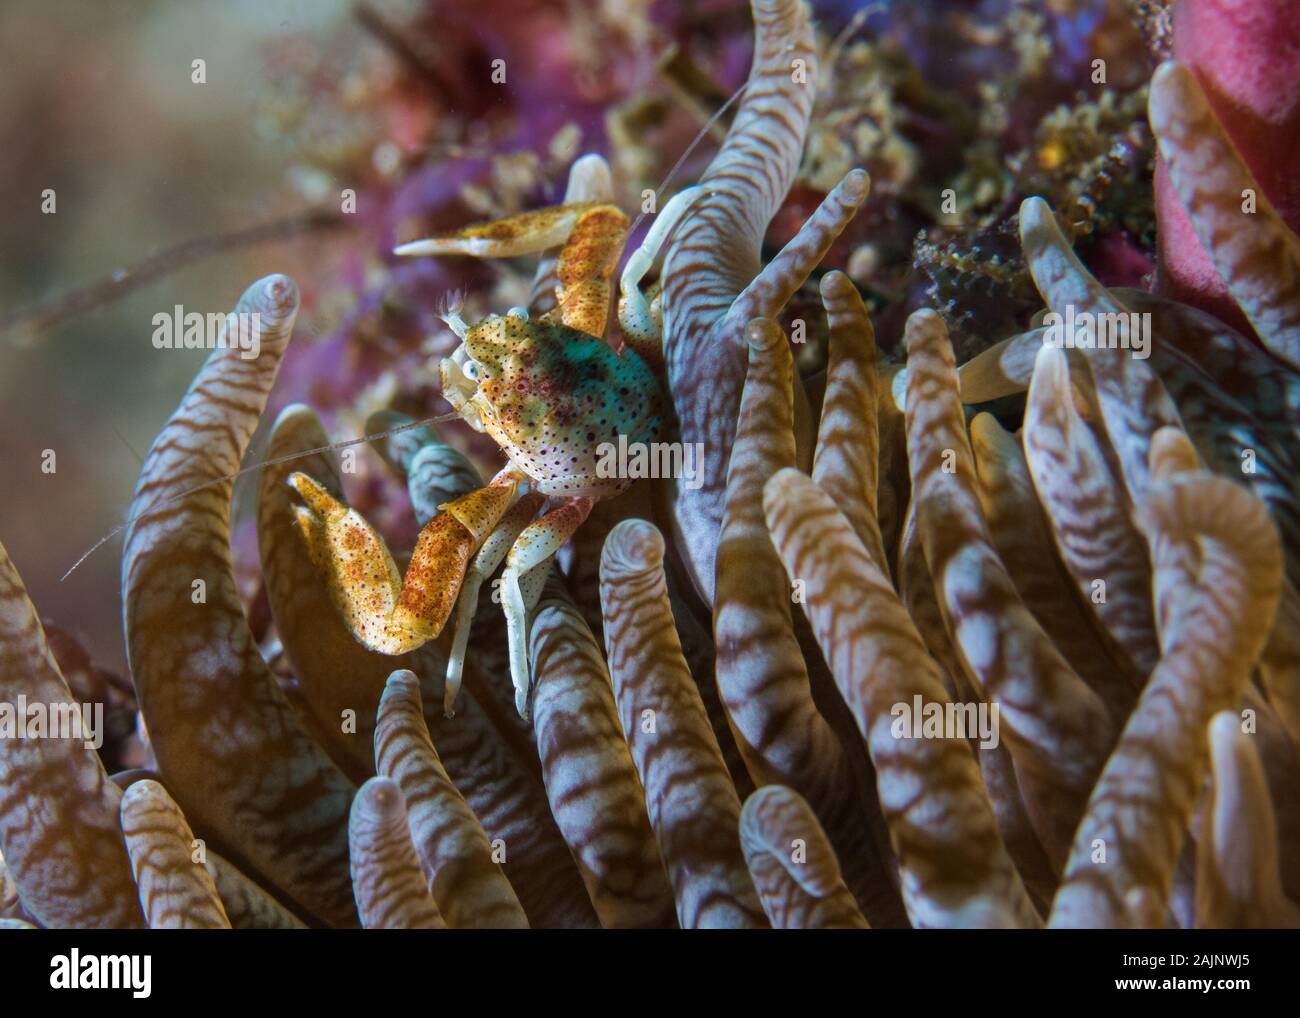 A tiny Porcelain crab in it's anemone. Stock Photo